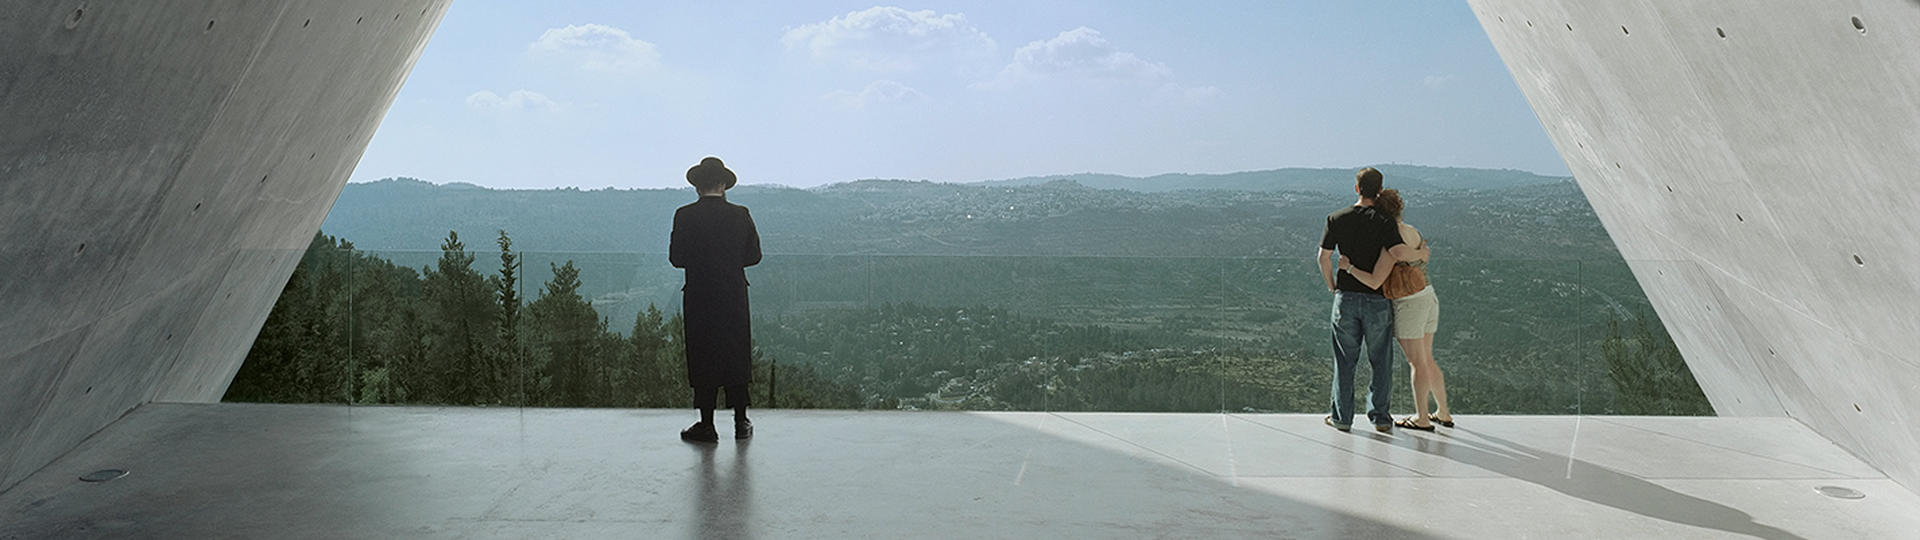 Hasidic Jew and a man and woman holding each other at Yad Vashem